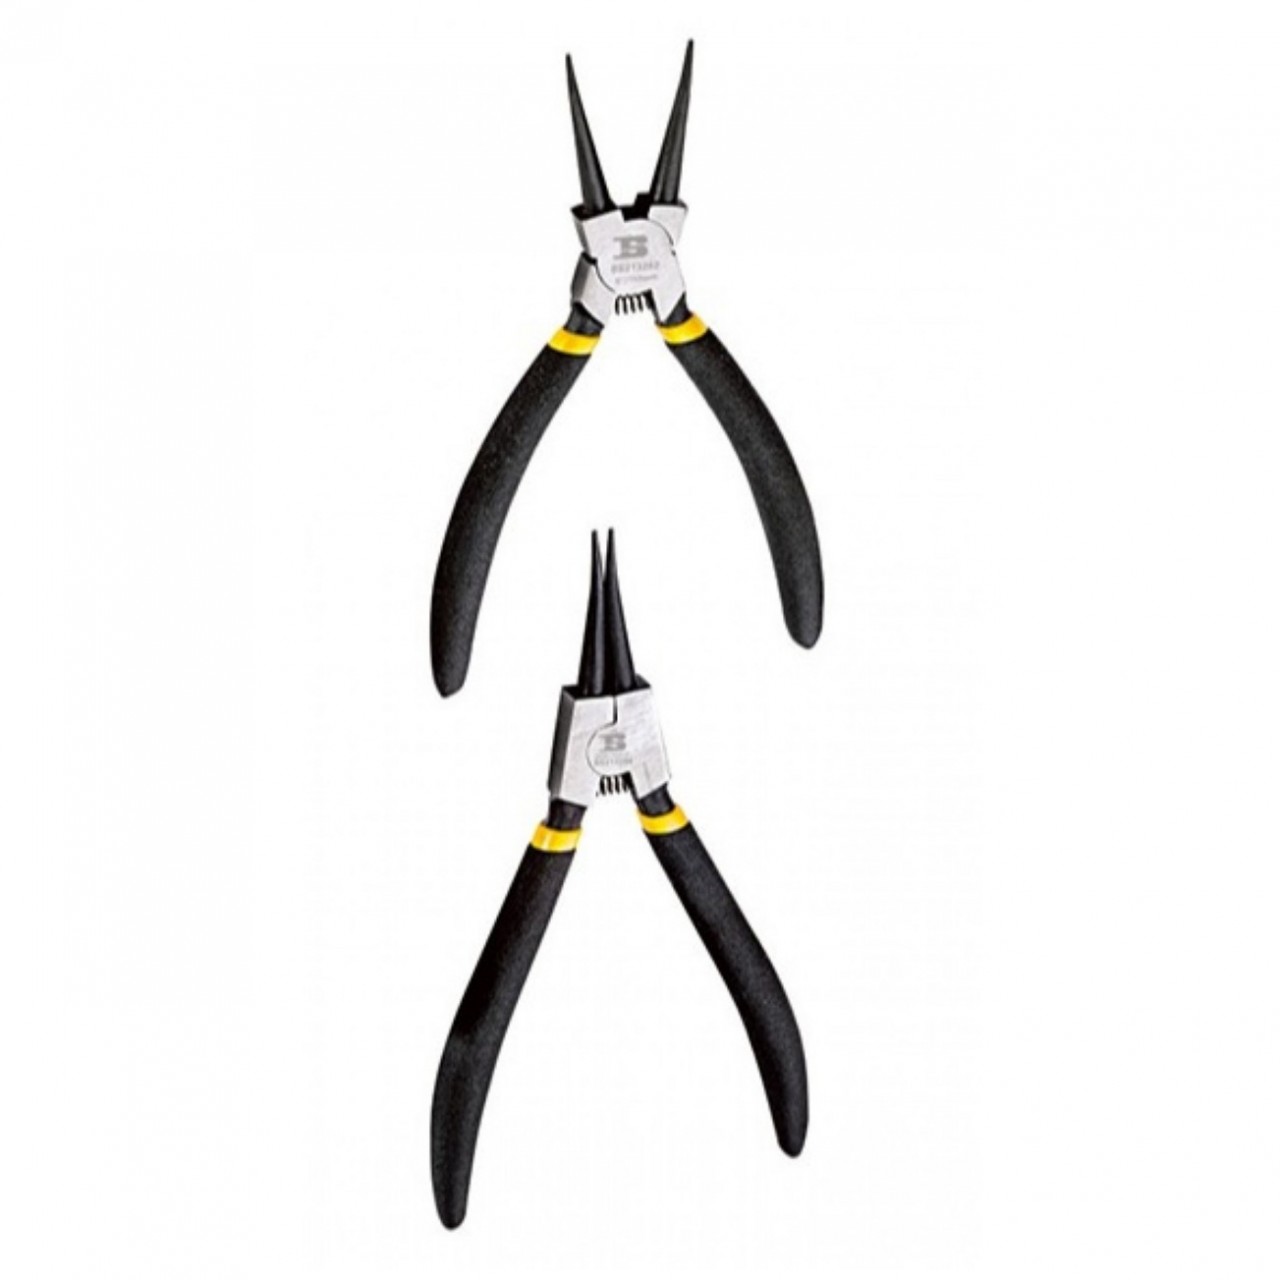 BOSI Snap Ring Pliers  BS213261 - Size 6"/150MM